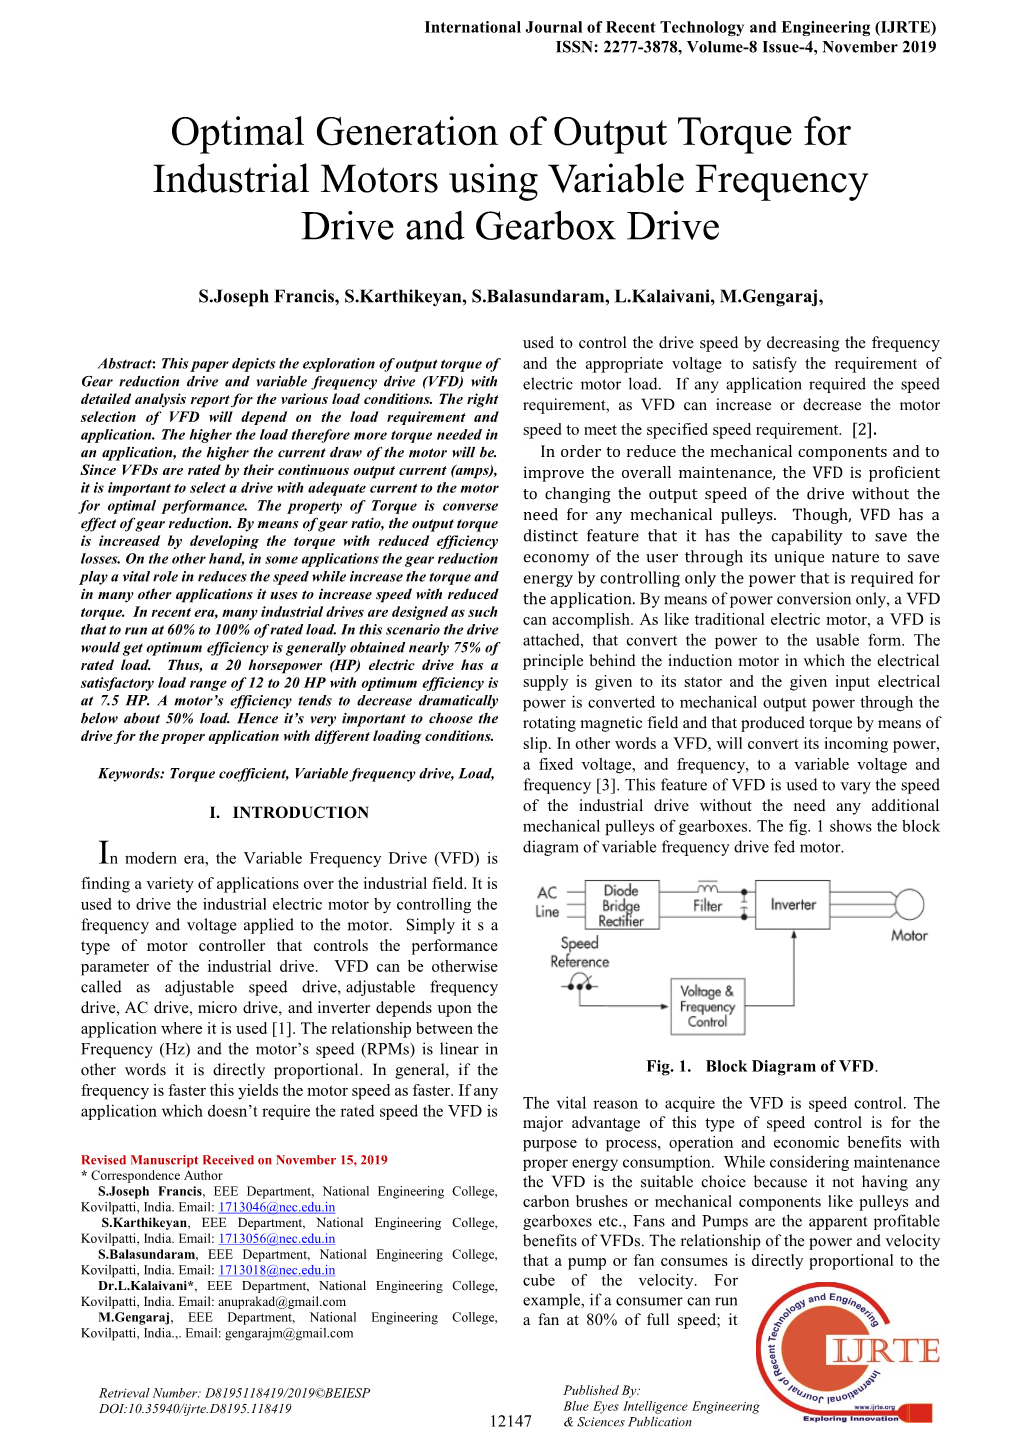 Optimal Generation of Output Torque for Industrial Motors Using Variable Frequency Drive and Gearbox Drive